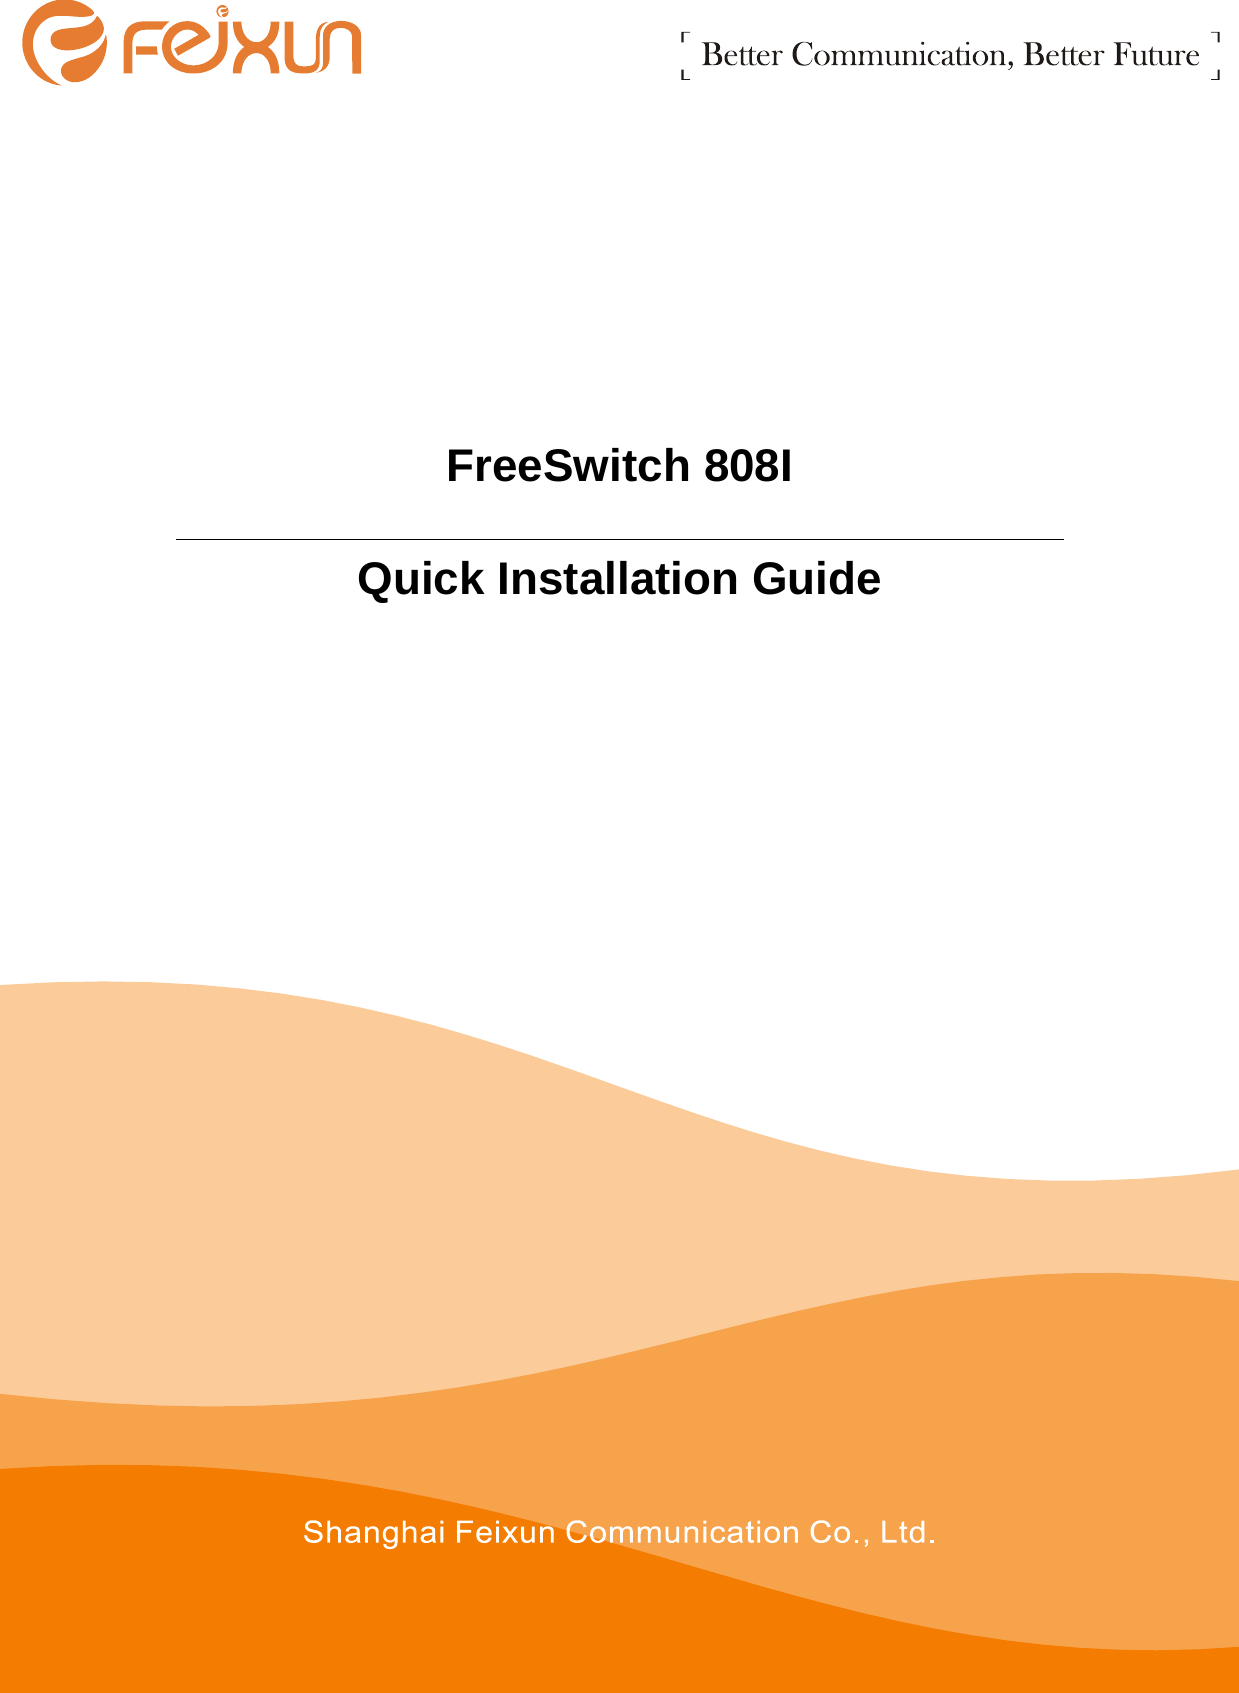    FreeSwitch 808I   Quick Installation Guide           